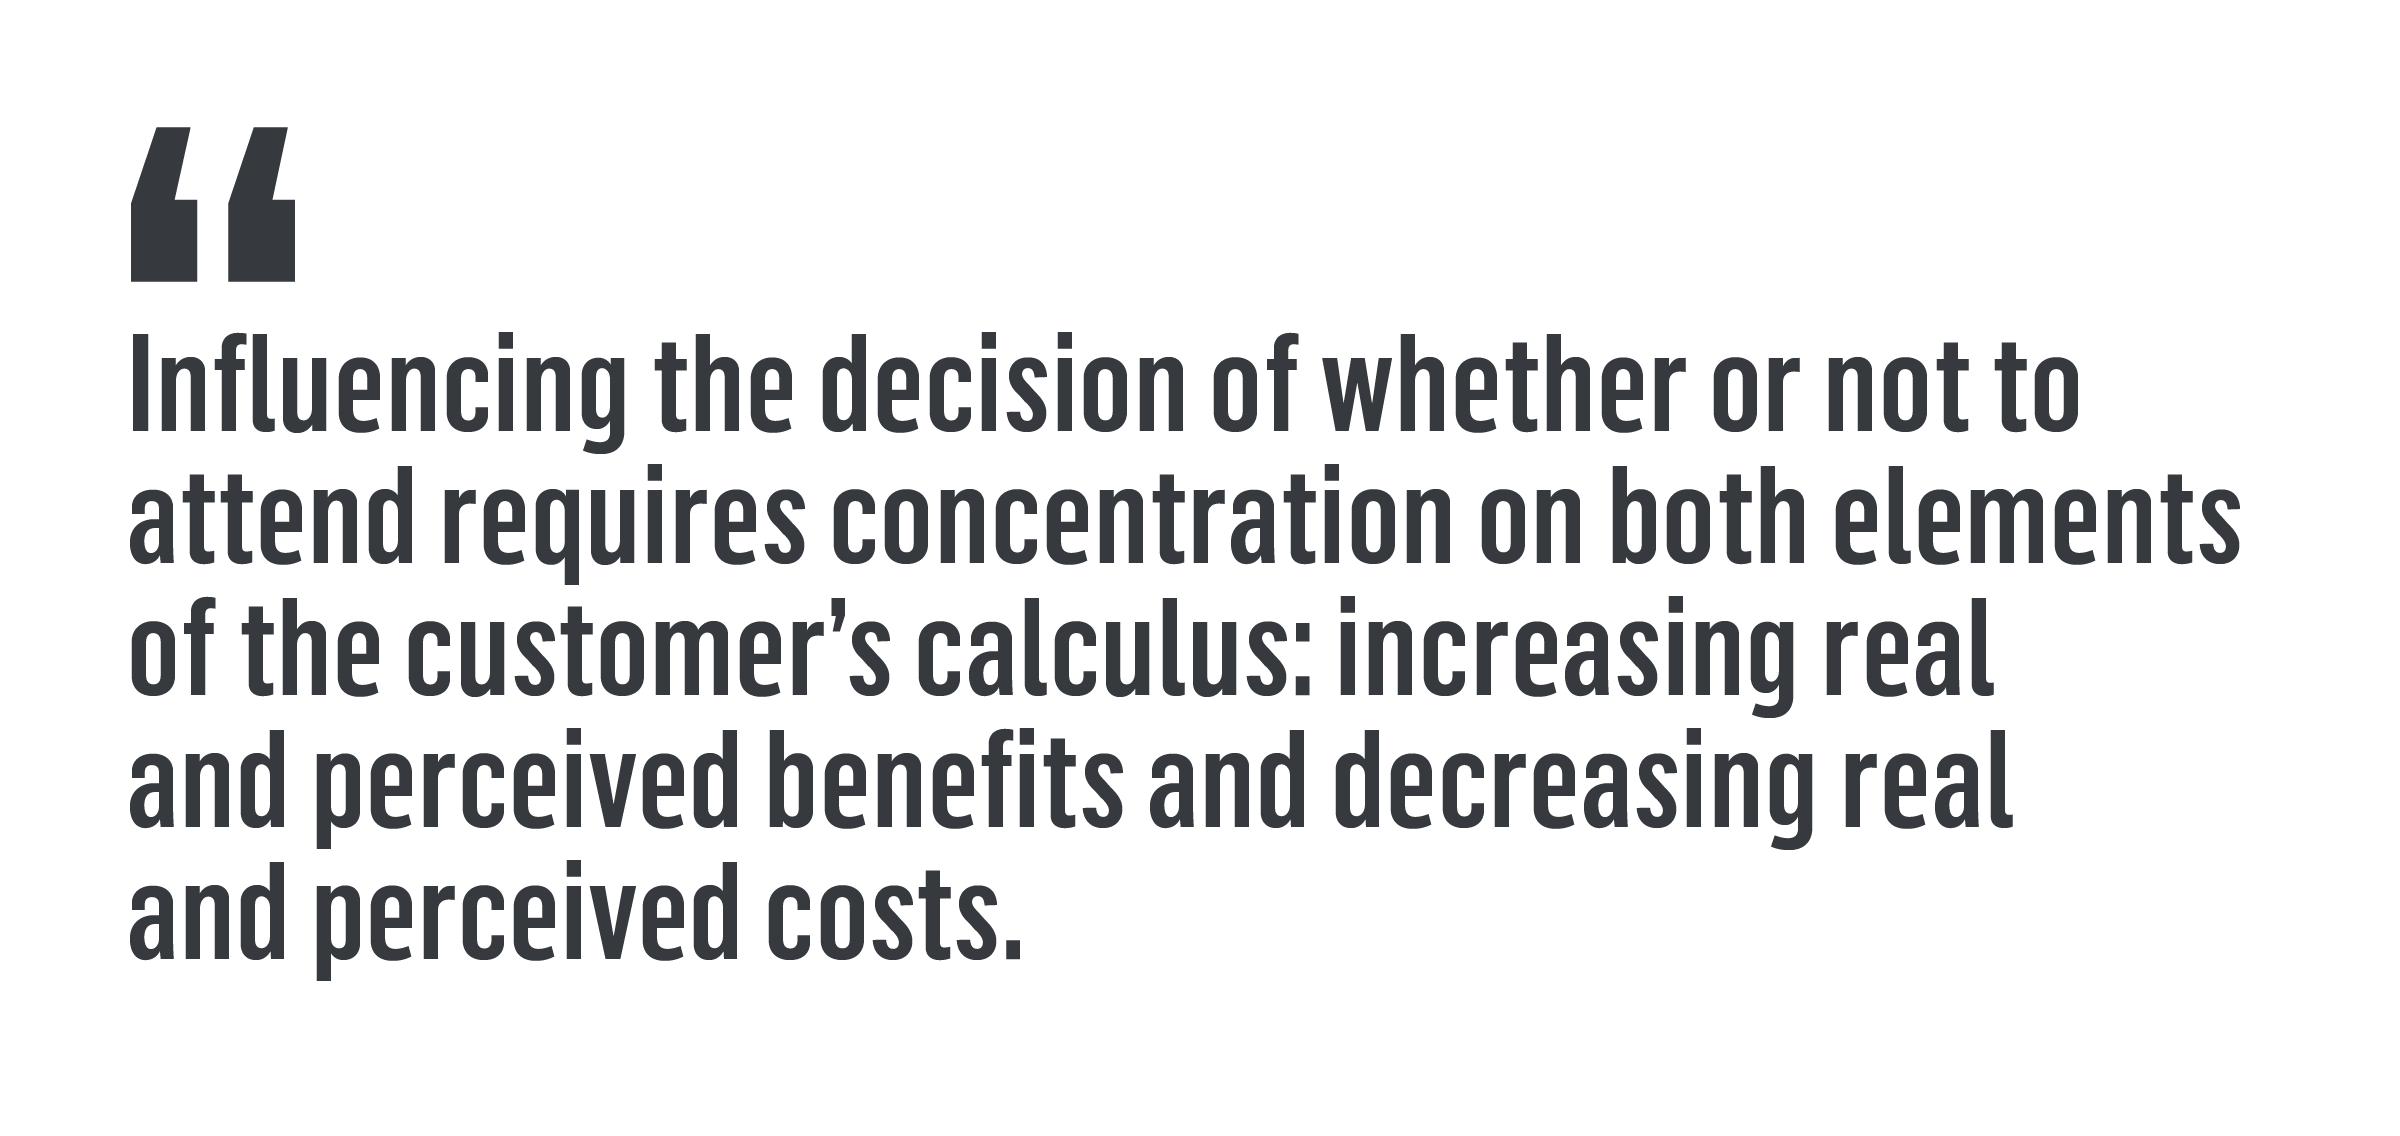 "Influencing the decision of whether or not to attend requires concentration on both elements of the customer’s calculus: increasing real and perceived benefits and decreasing real and perceived costs."